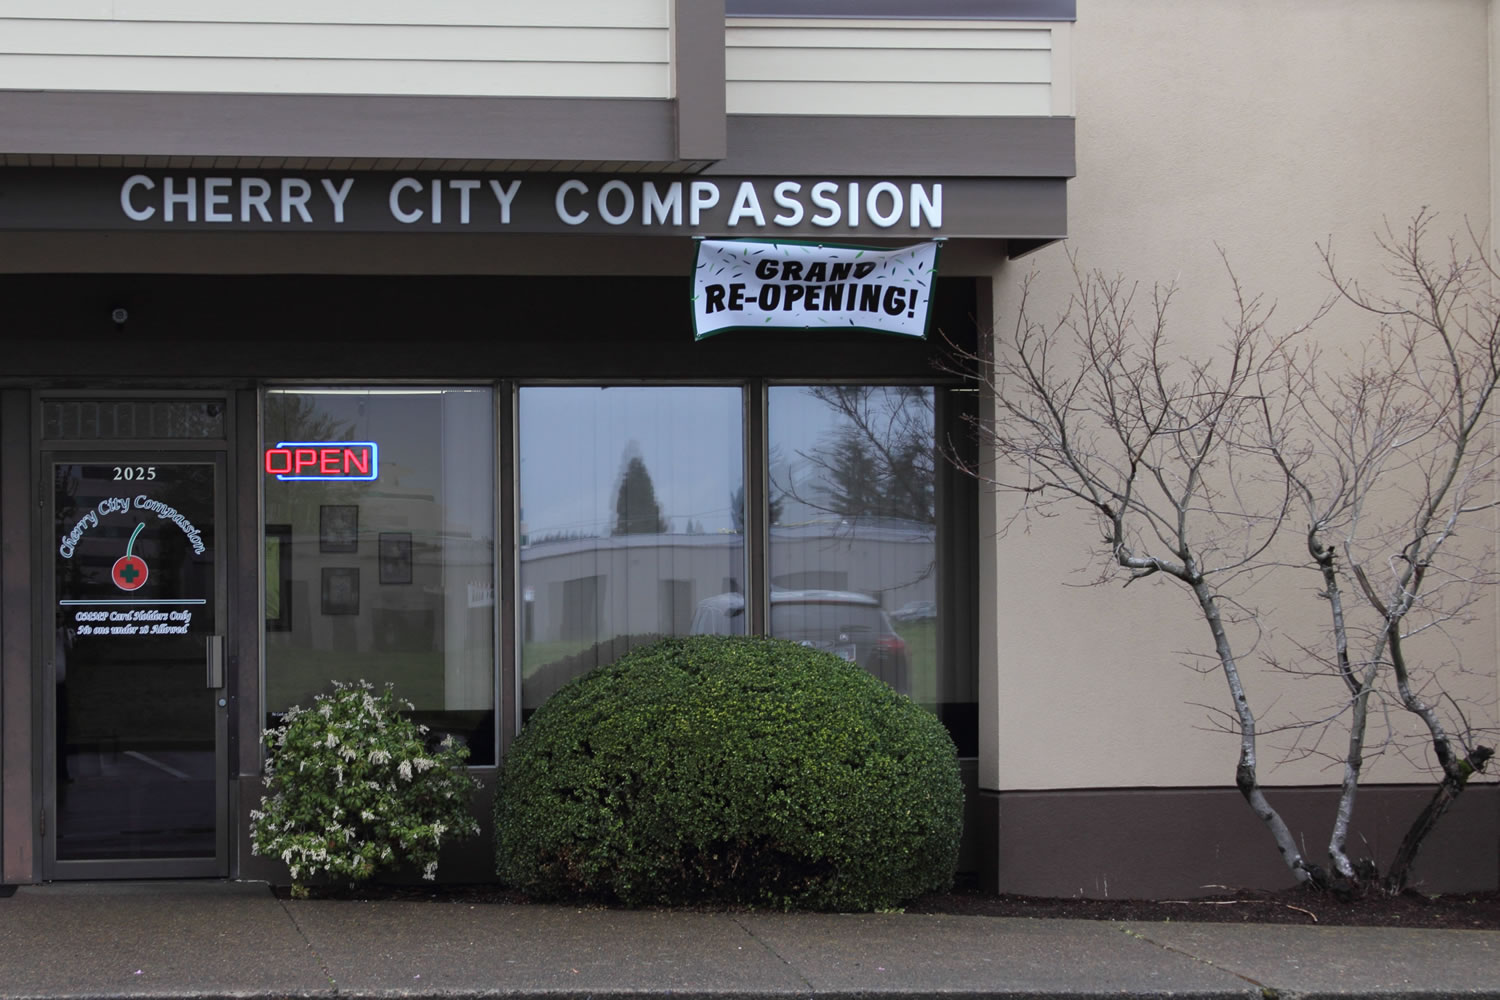 Cherry City Compassion is a medical marijuana store in Salem, Ore. Until now, medical pot shops have operated in a gray area.